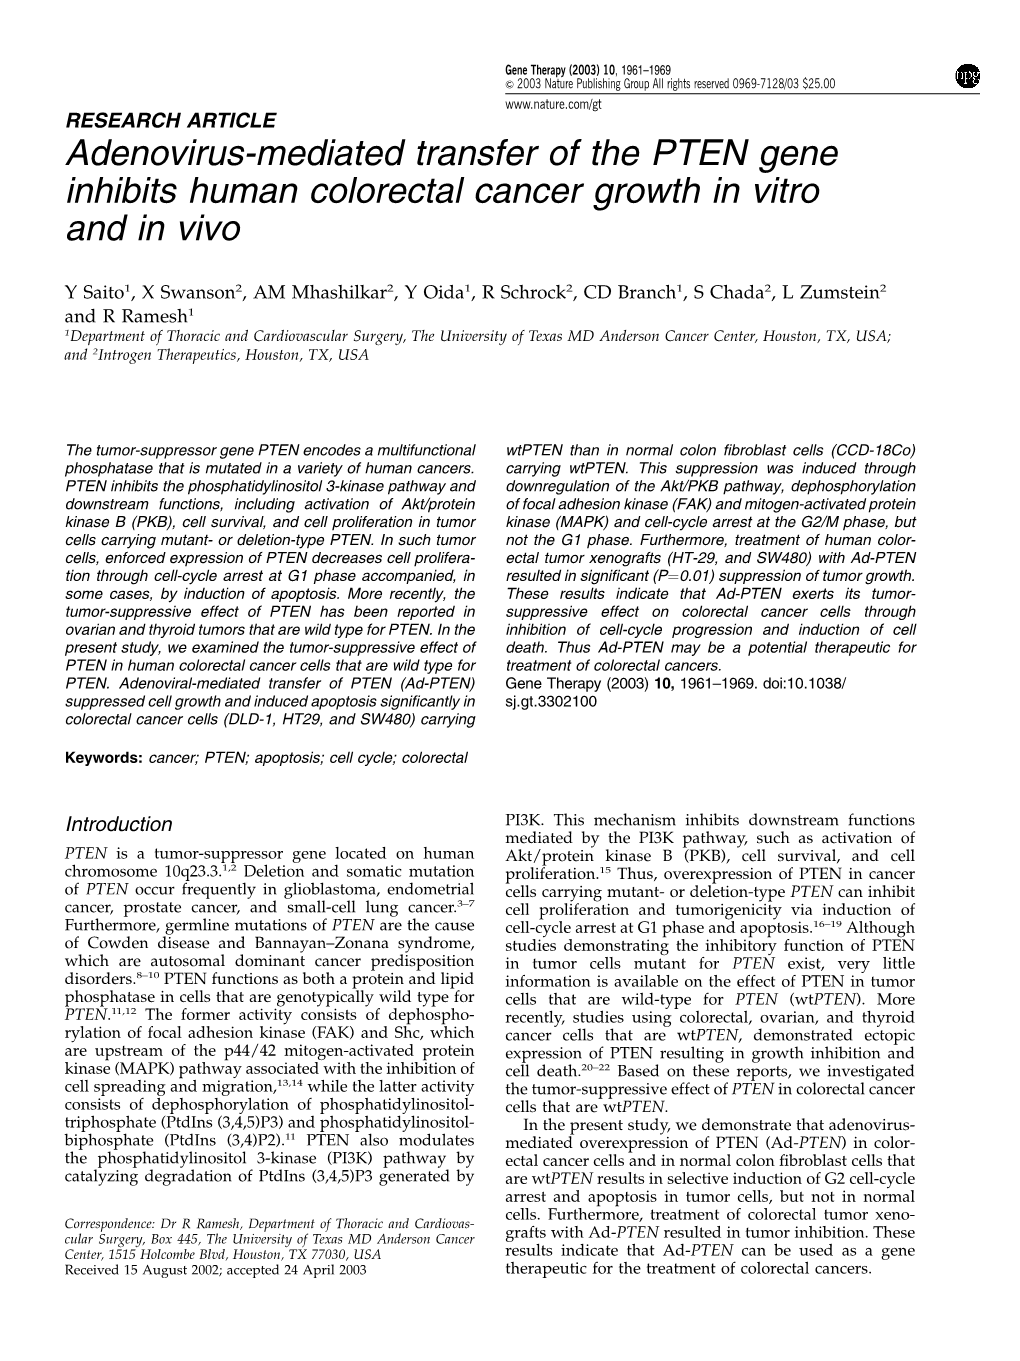 Adenovirus-Mediated Transfer of the PTEN Gene Inhibits Human Colorectal Cancer Growth in Vitro and in Vivo